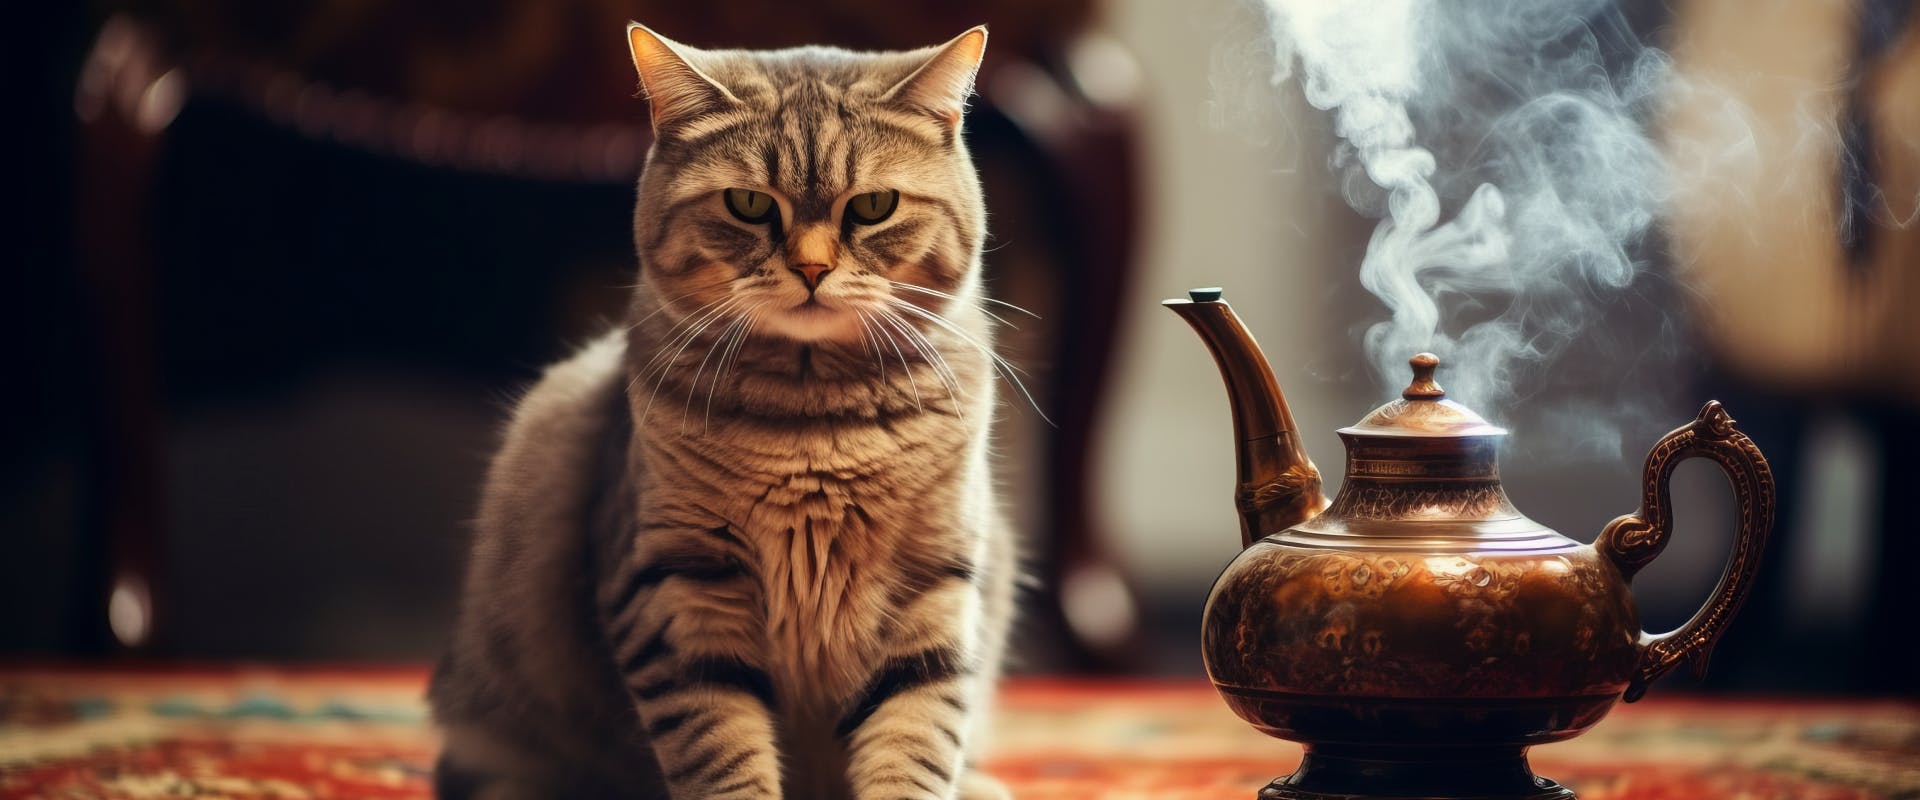 tabby cat sat next to a steaming kettle on a rug